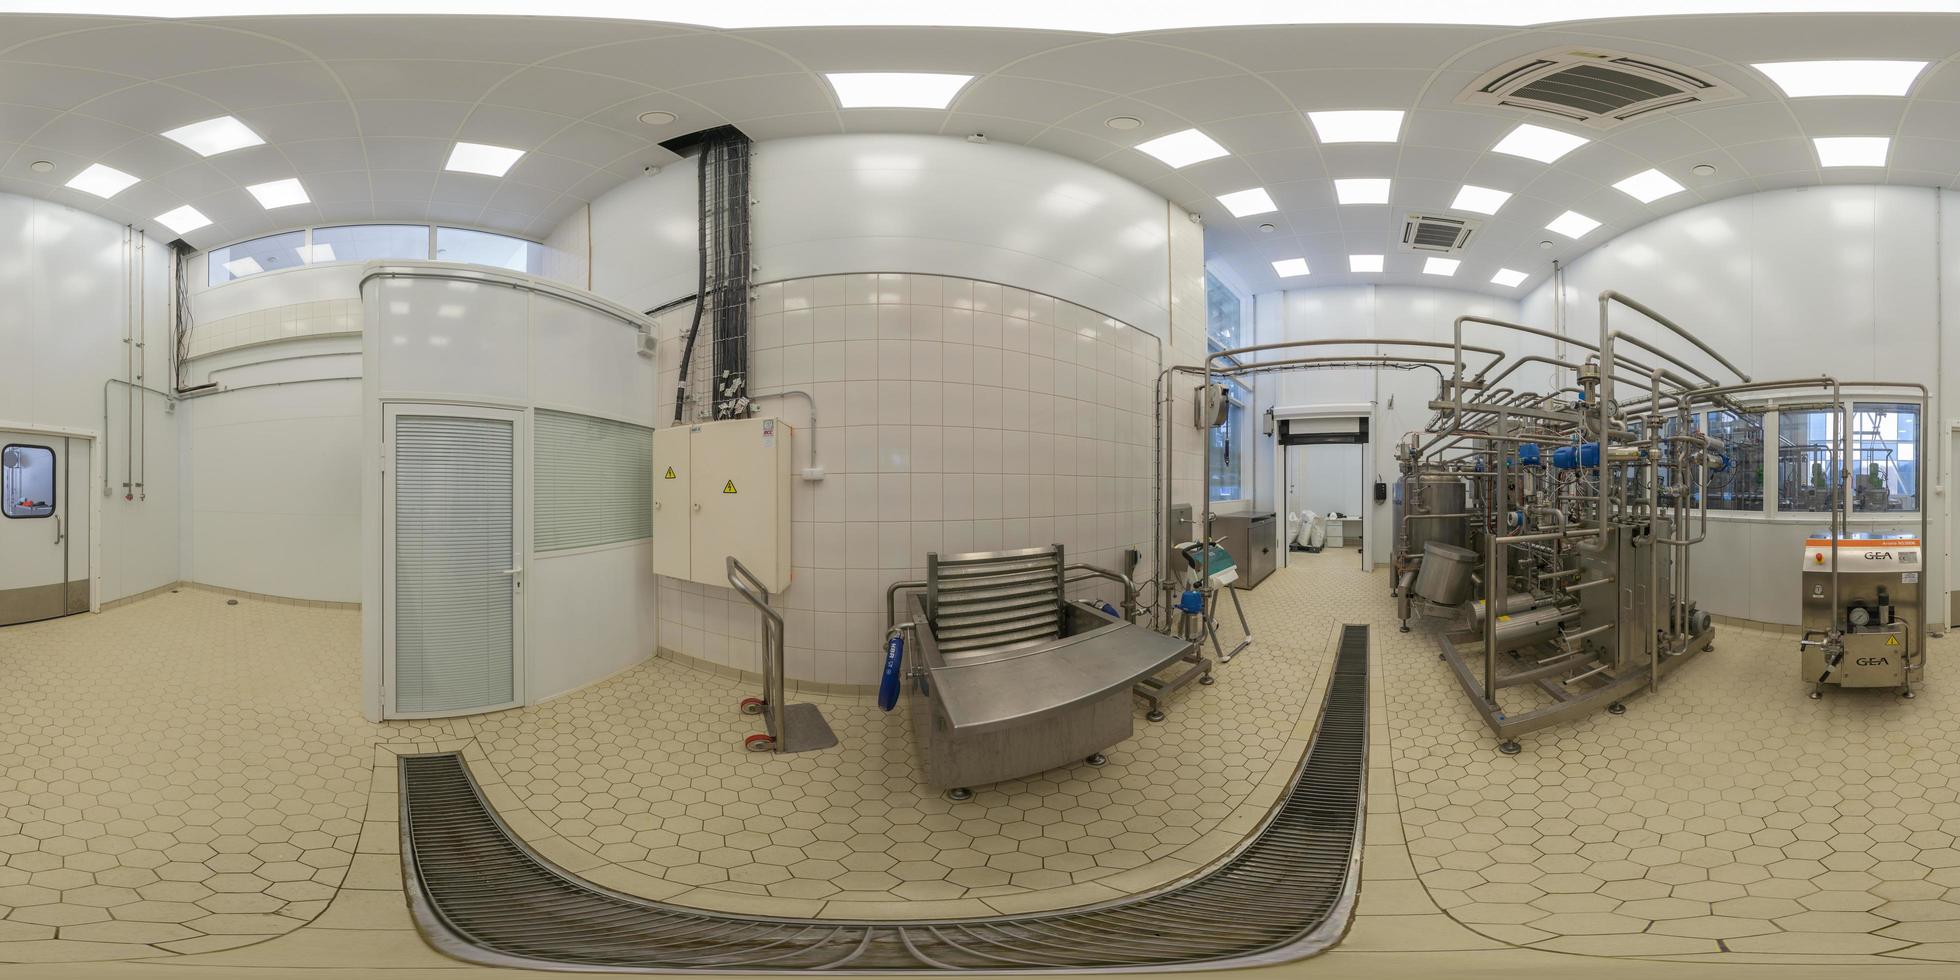 TULA, RUSSIA FEBRUARY 11, 2013 Inside of food factory laboratory spherical panorama in equirectangular projection. photo